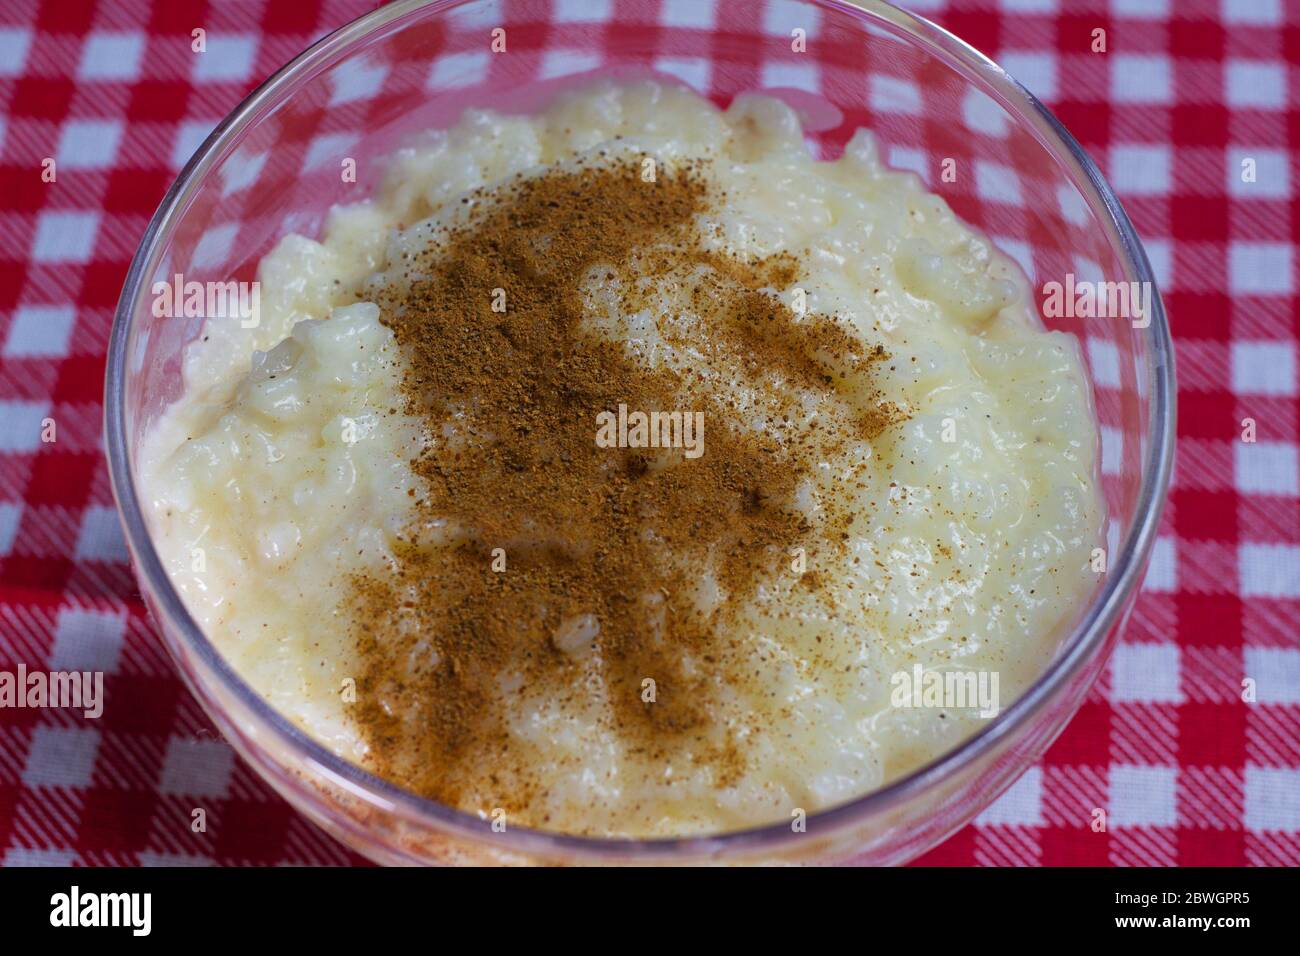 https://c8.alamy.com/comp/2BWGPR5/sweet-rice-or-rice-pudding-with-cinnamon-powder-icing-2BWGPR5.jpg